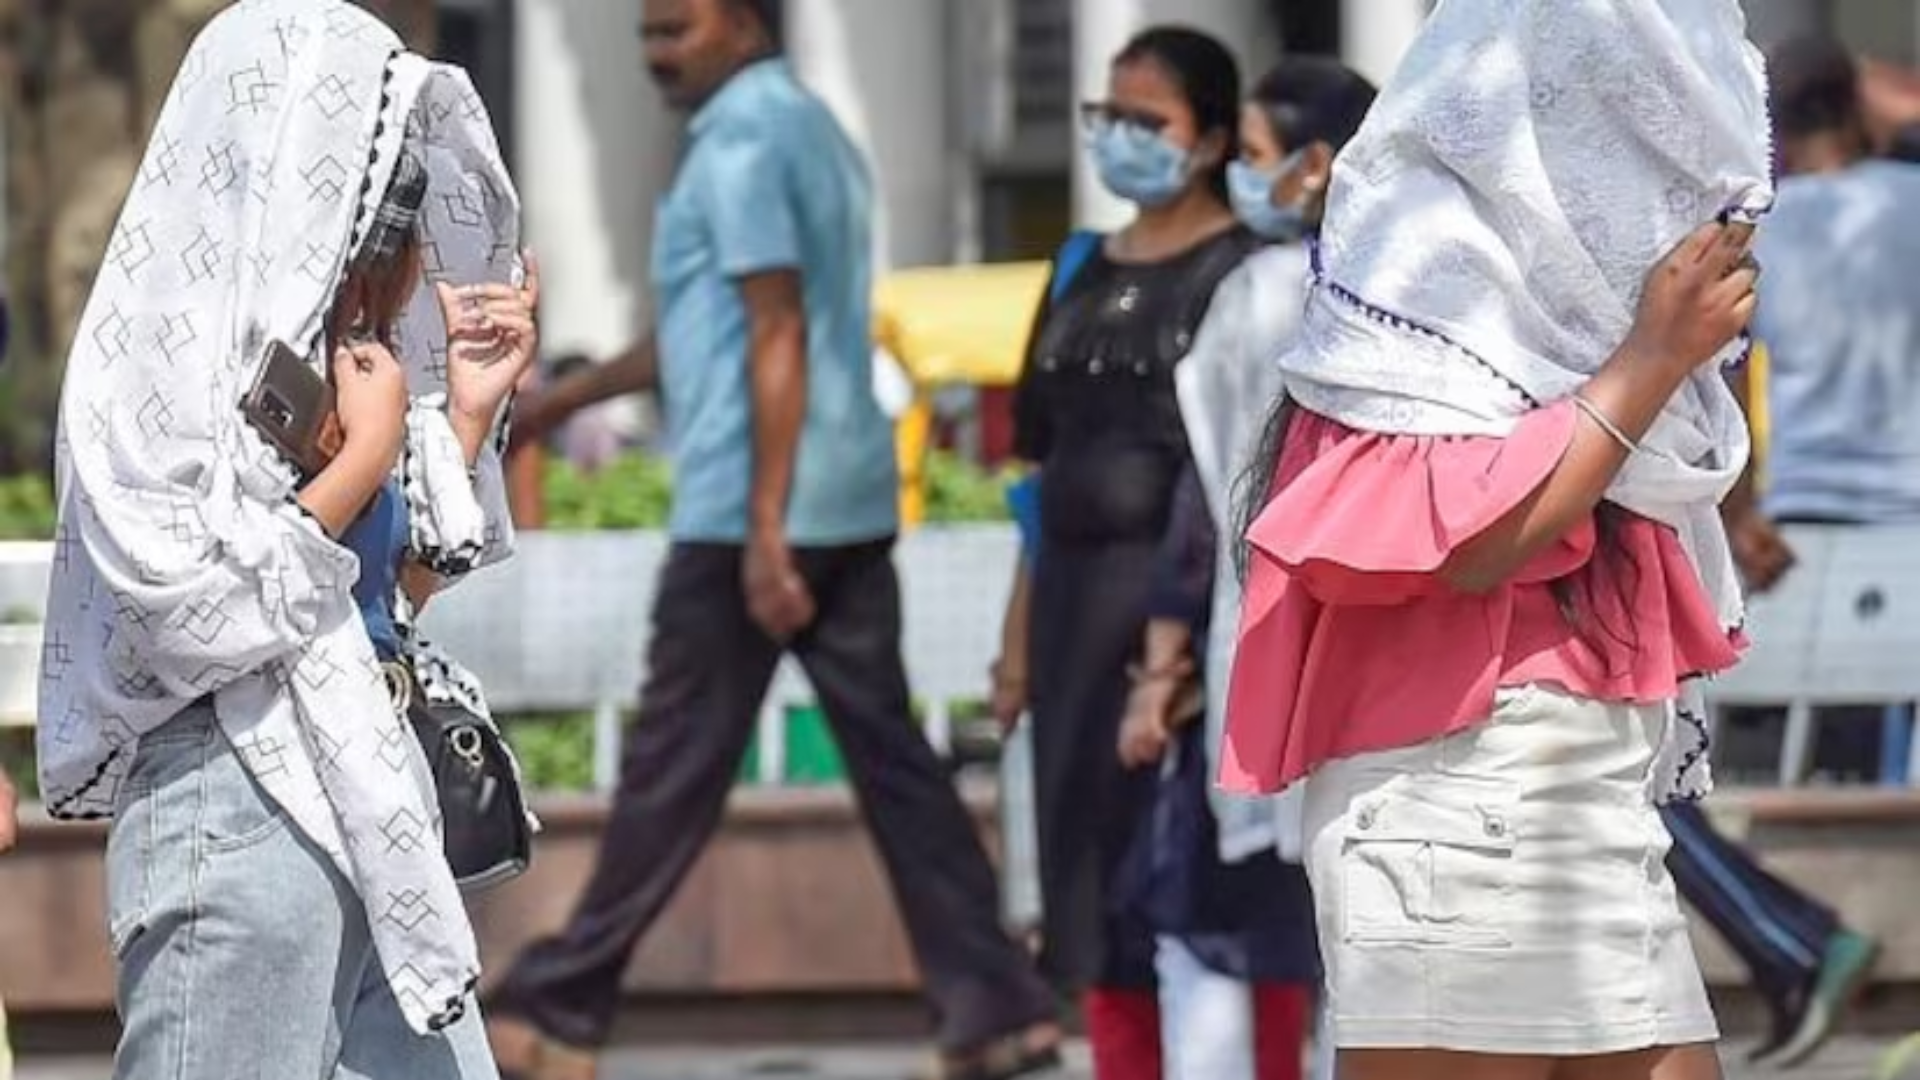 East Asia And The Pacific Brace For Intense Heat Waves: 243 Million Children At Risk